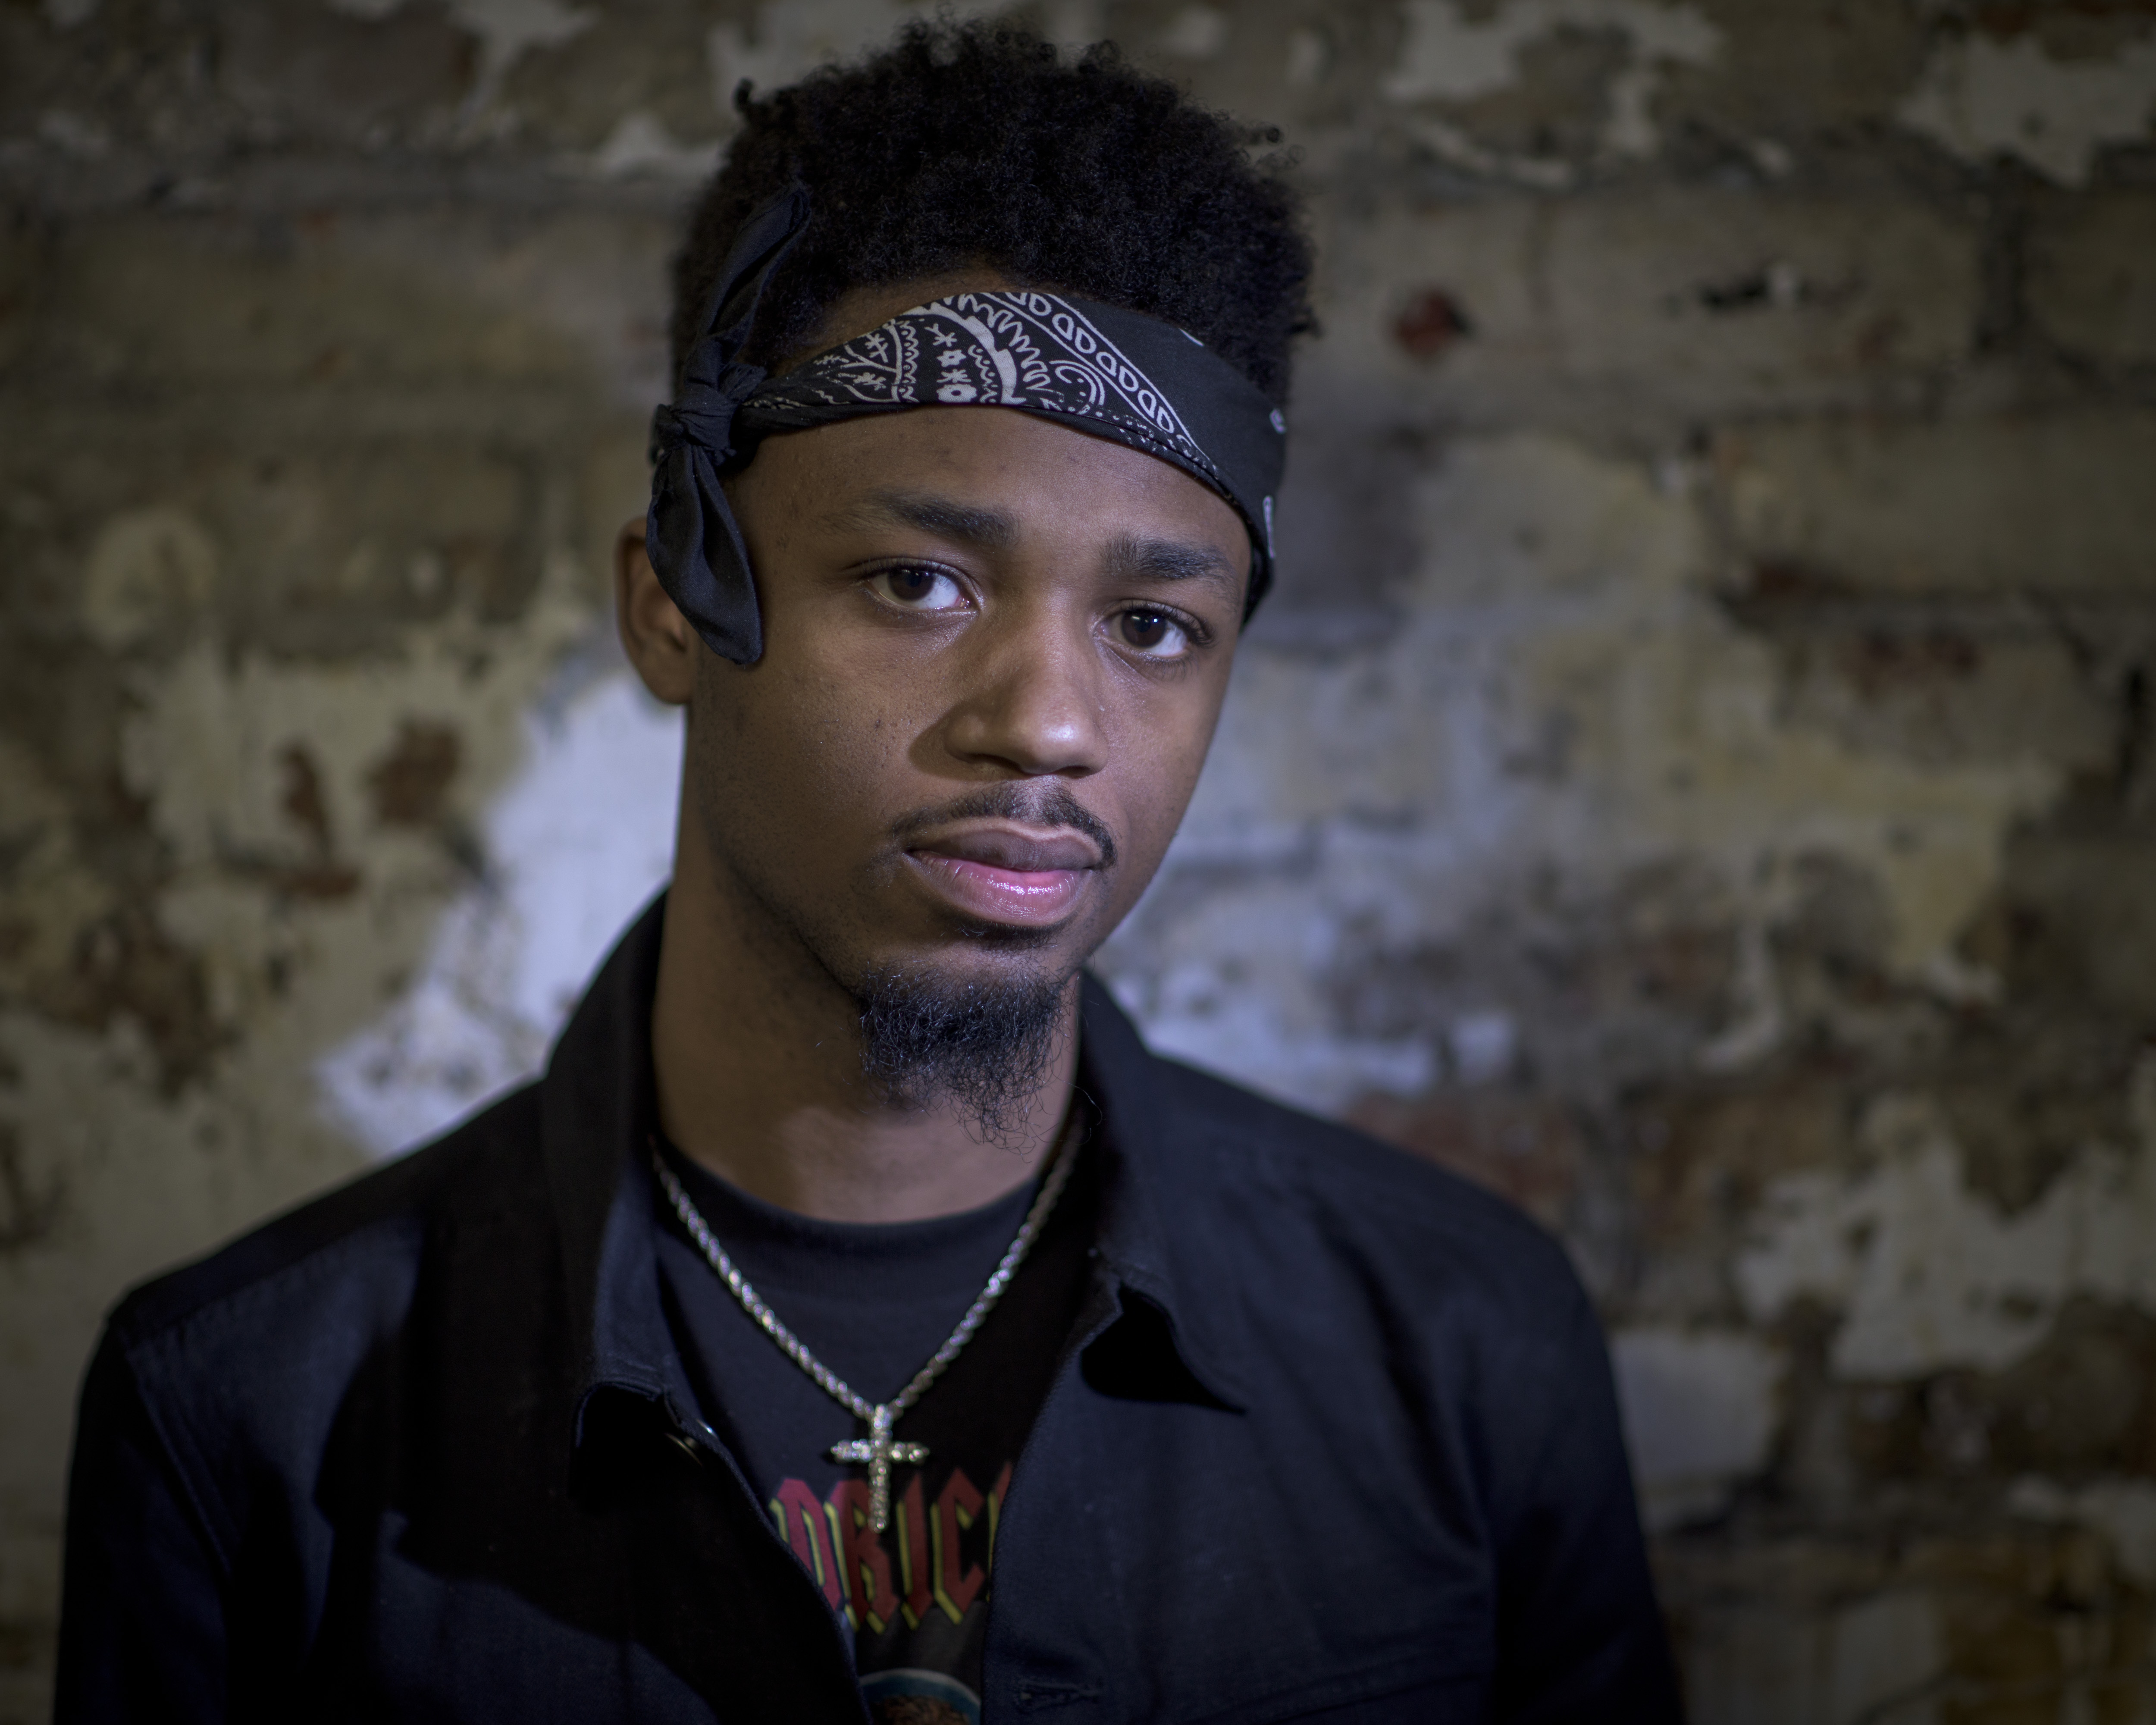 Metro Boomin Wallpaper Image Photos Pictures Background